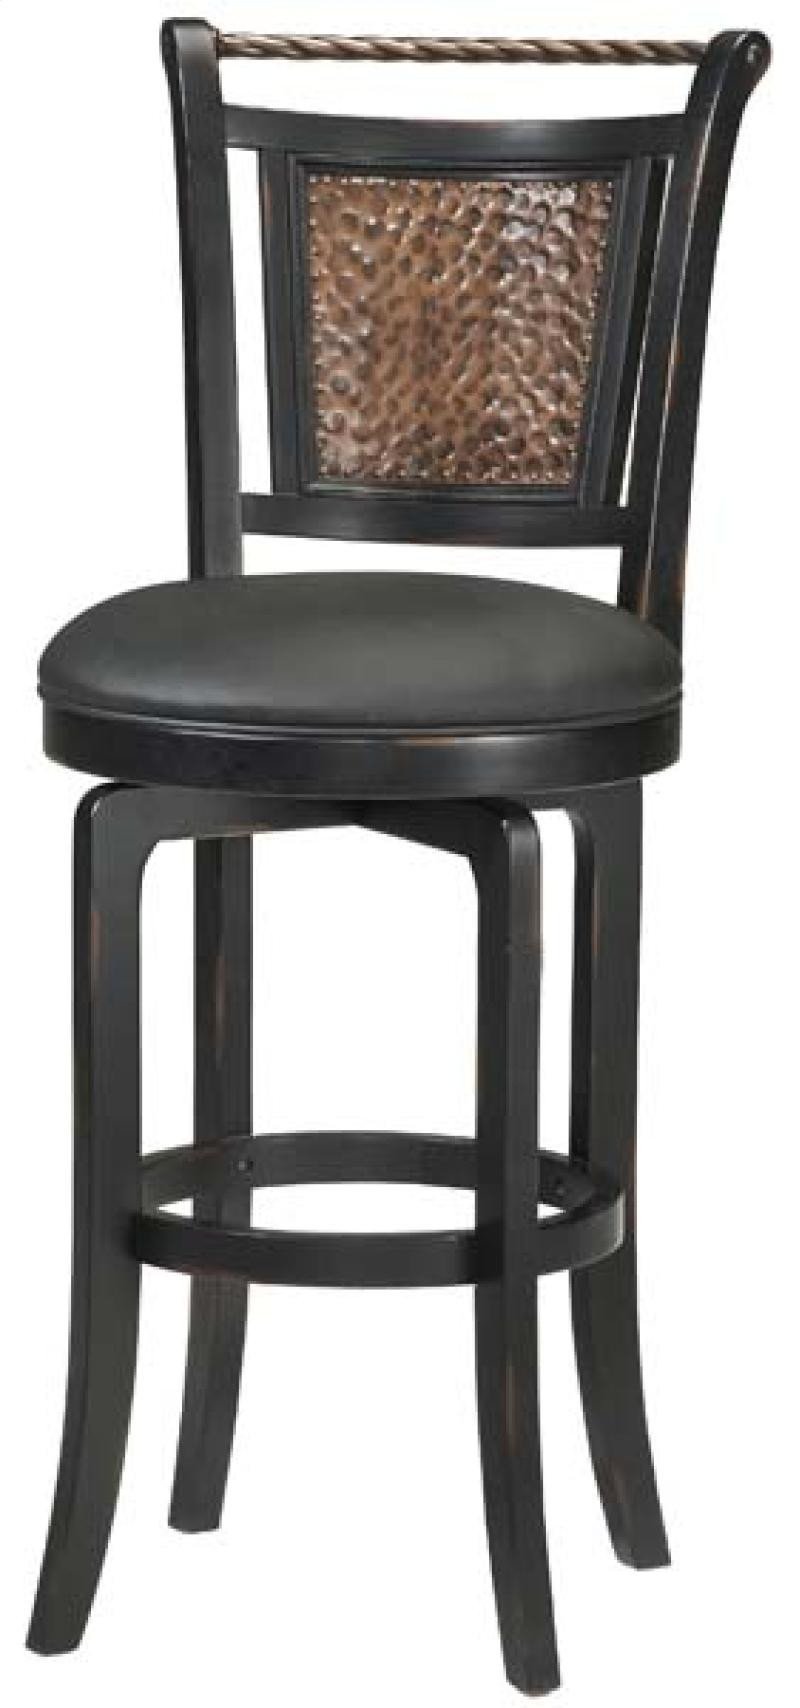 Hillsdale Furniture 4935-826s Norwood Swivel Counter Stool